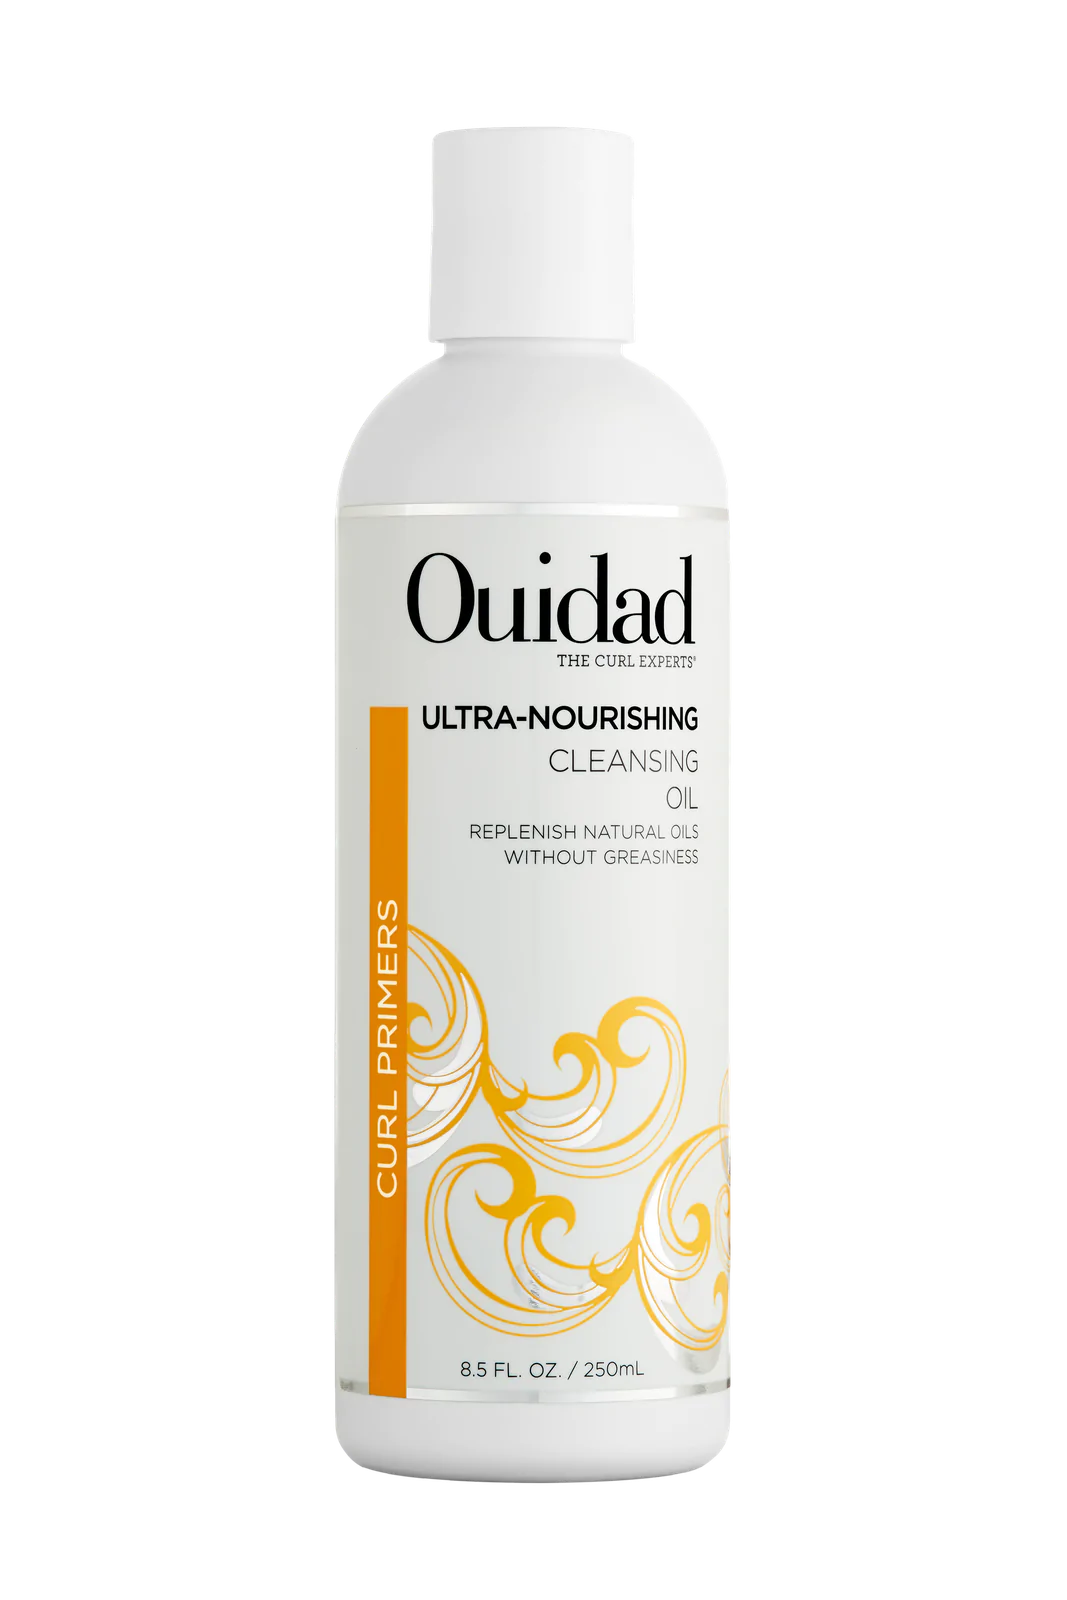 Ouidad Ultra-Nourishing Cleansing Oil Shampoo